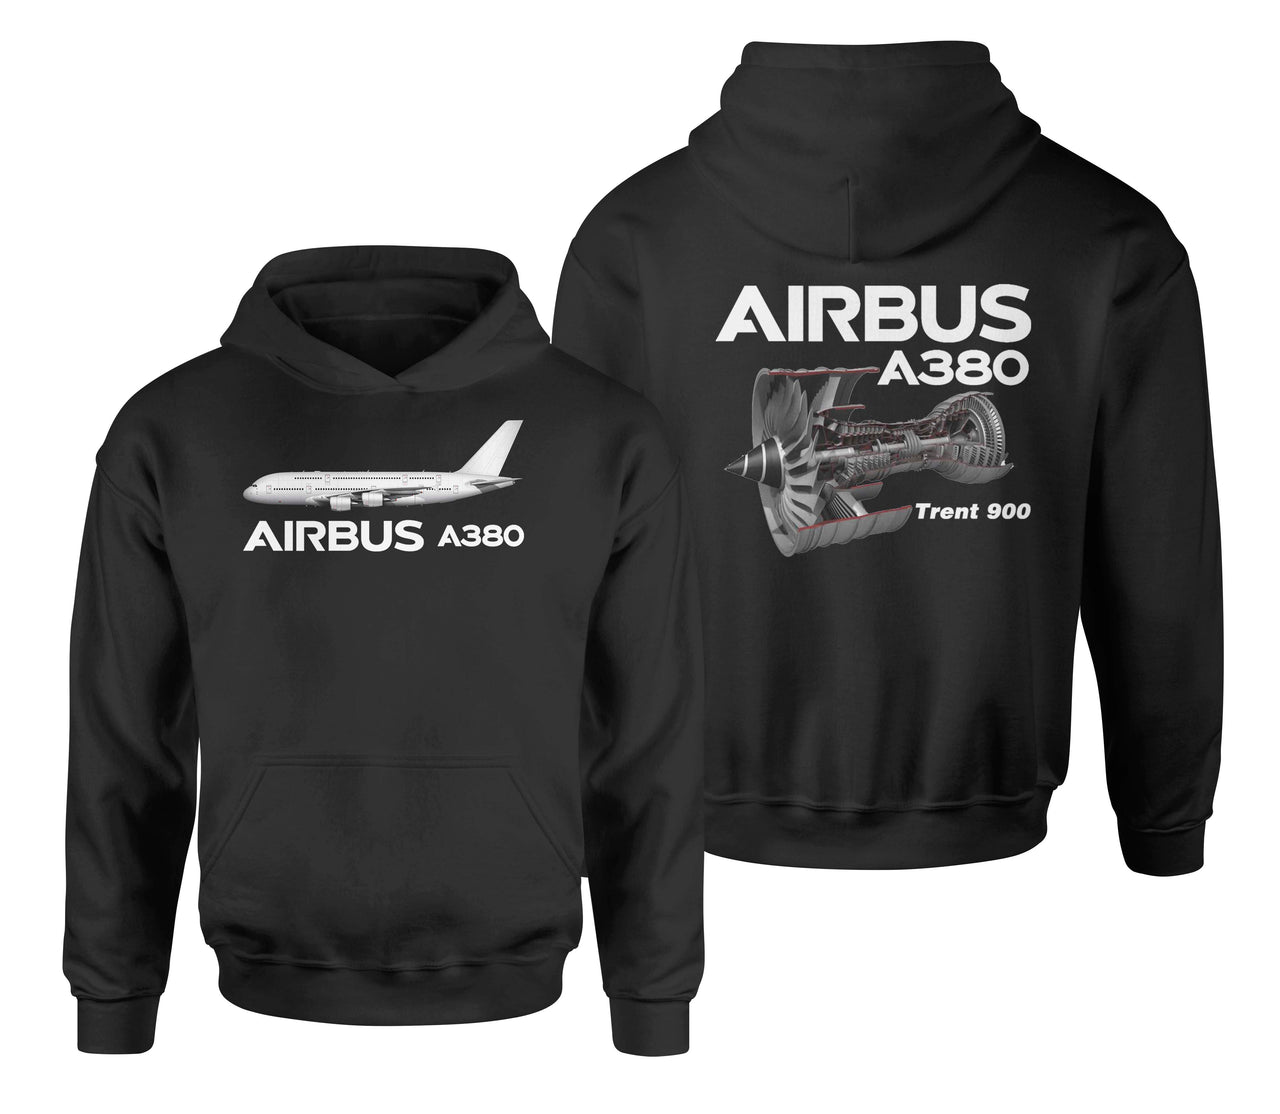 Airbus A380 & Trent 900 Engine Designed Double Side Hoodies